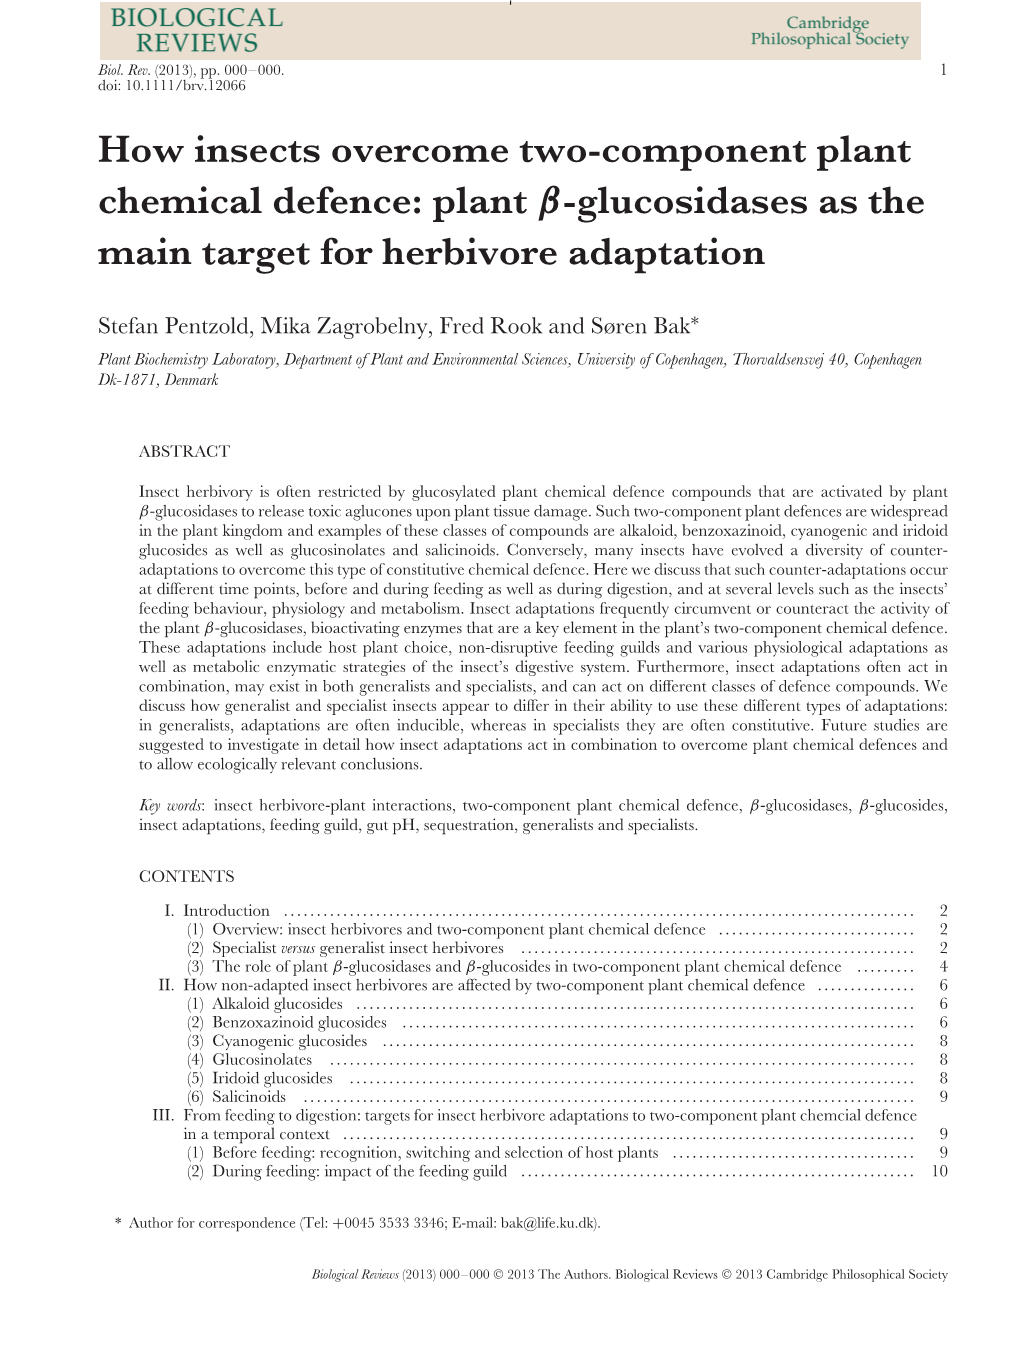 How Insects Overcome Two-Component Plant Chemical Defence: Plant Β-Glucosidases As the Main Target for Herbivore Adaptation